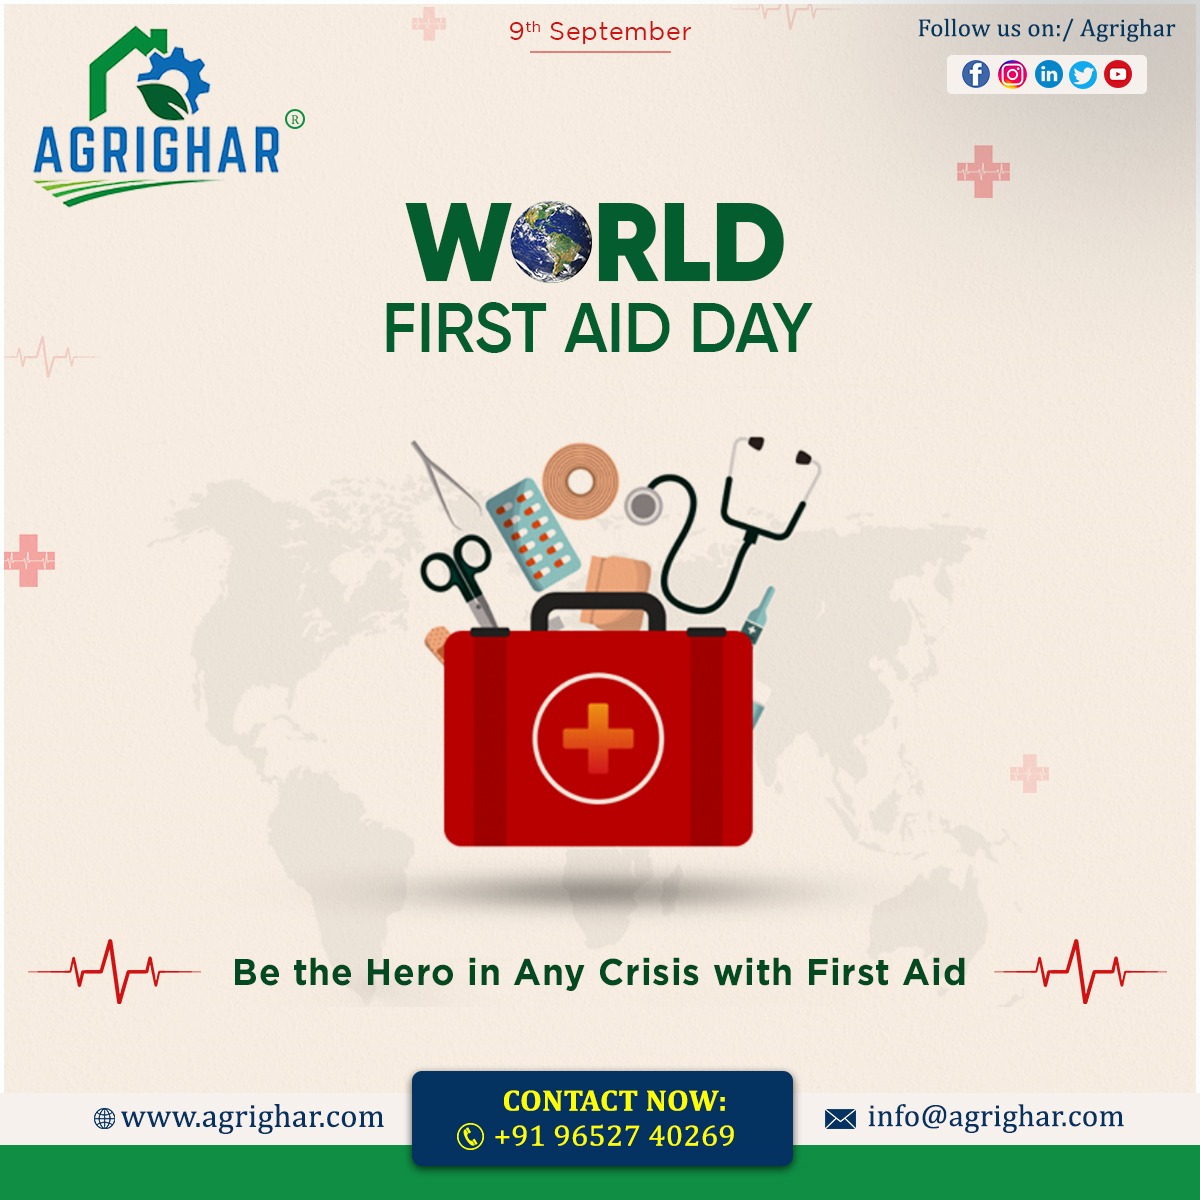 #empower💪 yourself with the #skills🧑‍⚕️ to be someone's #lifeline.🙌

💊💉🩹World First Aid Day🩺💊🩹
#firstaid #cpr #firstaidtraining #training #firstaidkit #safety #emergency #paramedic #cprtraining #aed #medical #firstaidcourse #safetyfirst #medic #k #ambulance #firstresponder